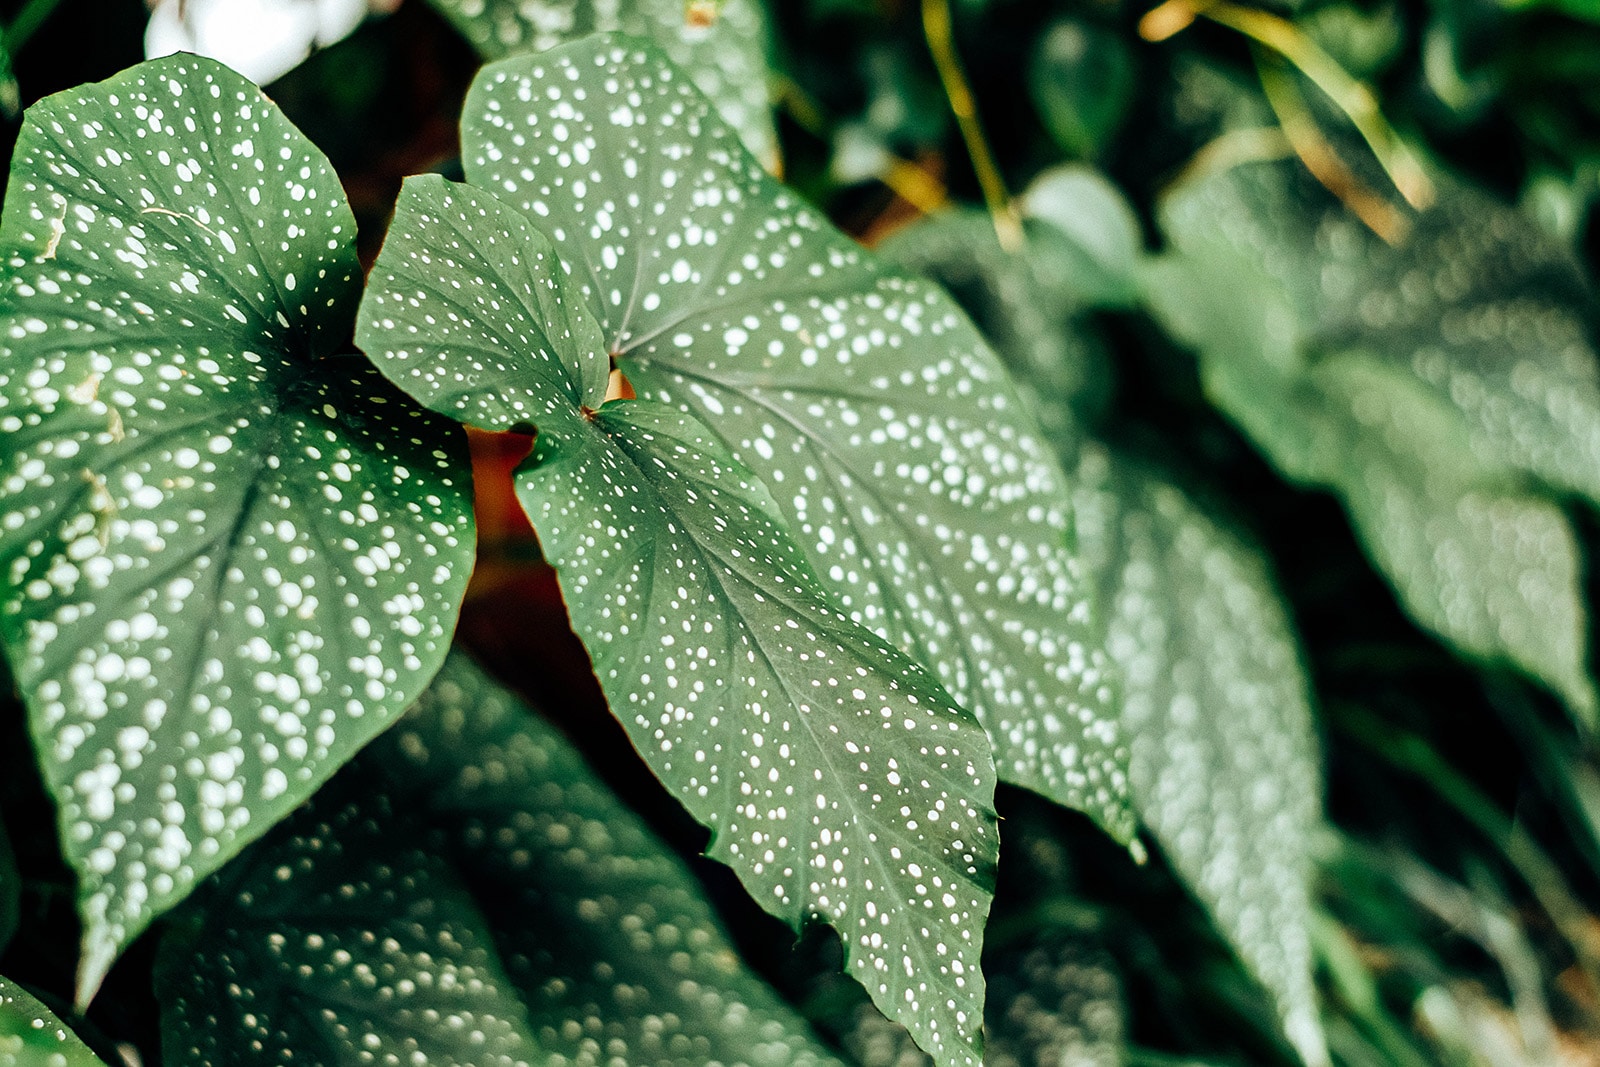 Close-up of polka dot Begonia plant with small silver dots all over its leaves